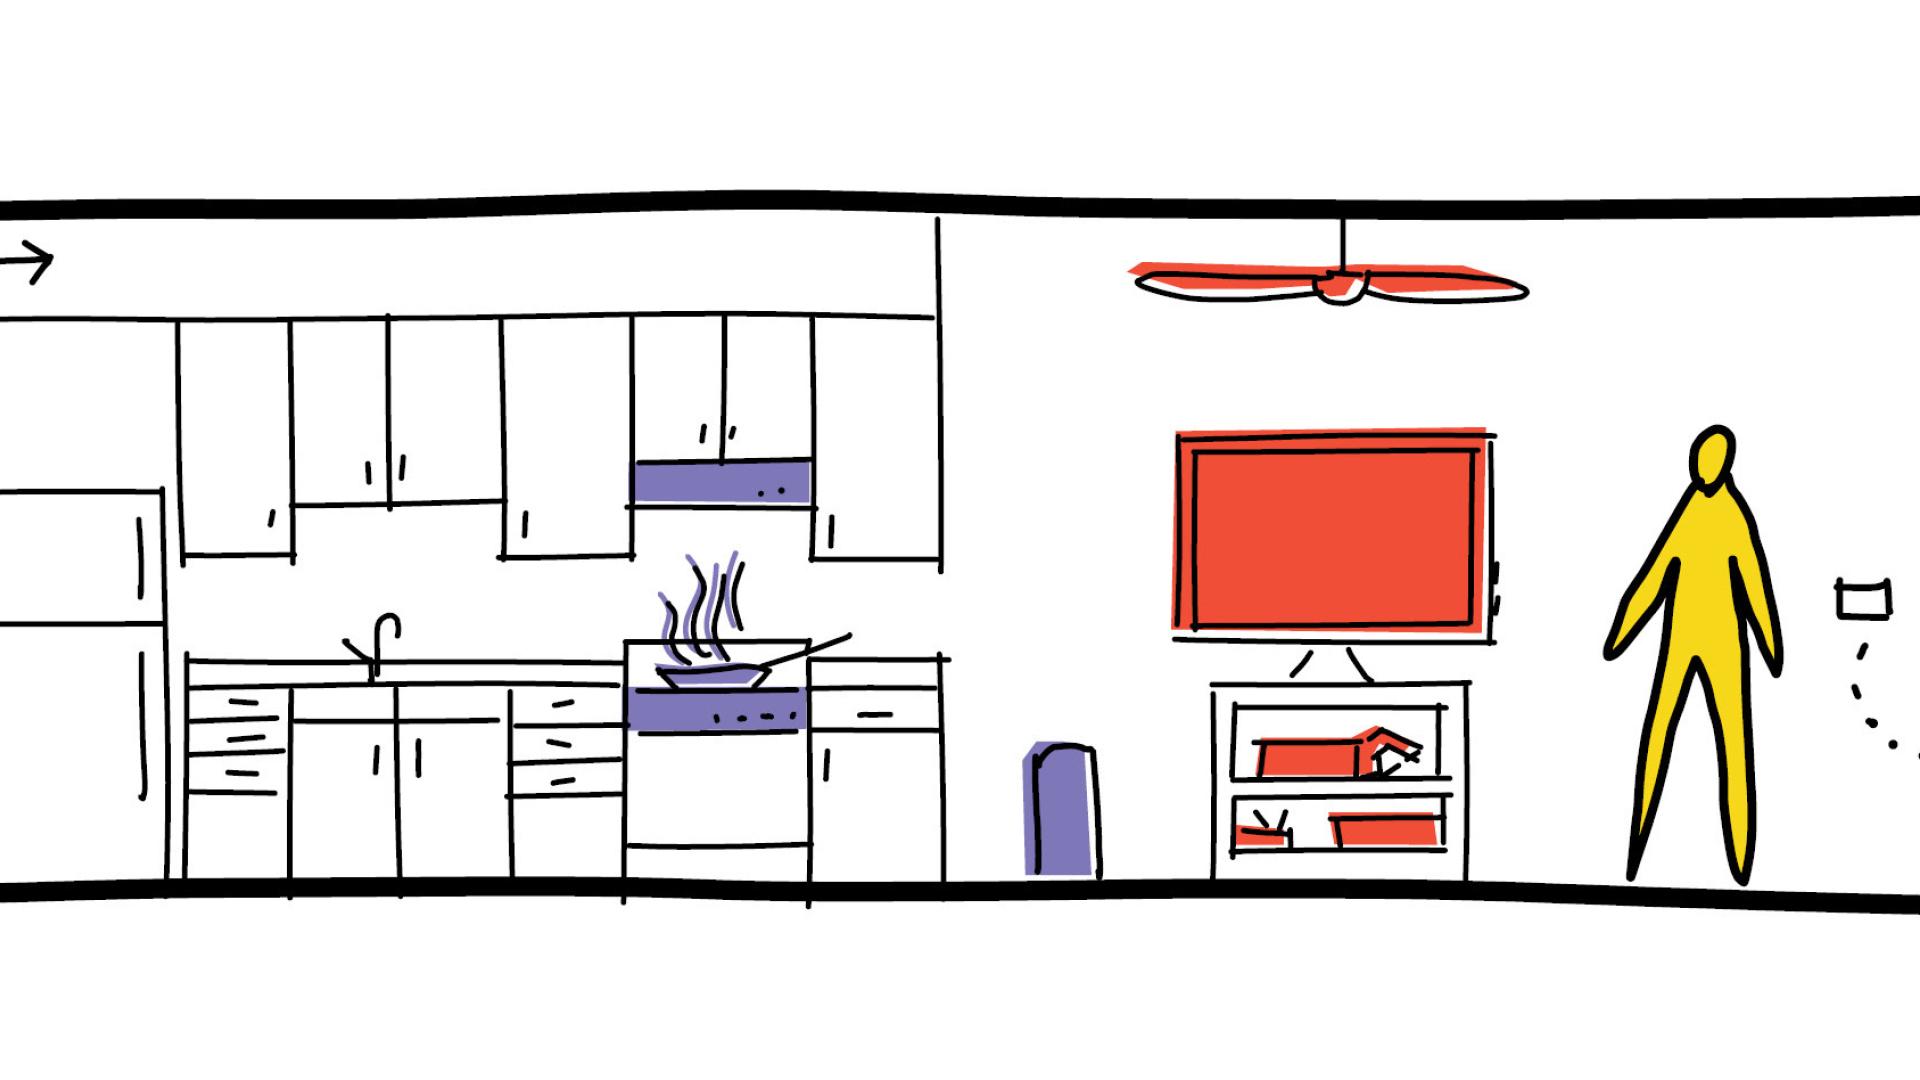 Illustration of apartment features for fire safety